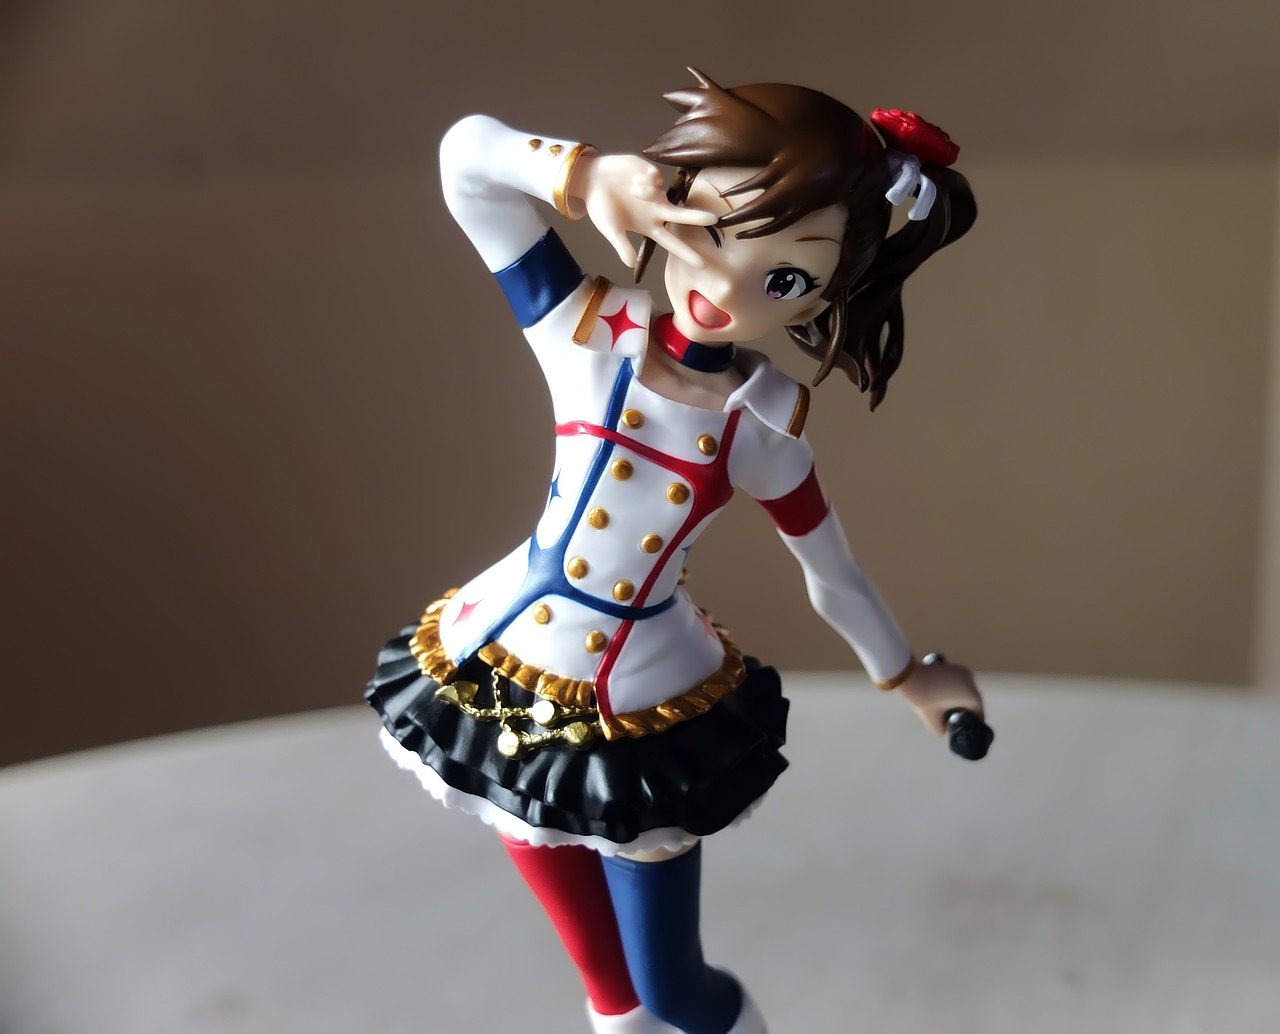 a close up of a figurine of a woman, inspired by Fujiwara Takanobu, cg society contest winner, wearing rr diner uniform, as though she is dancing, very very low quality picture, full body photogenic shot